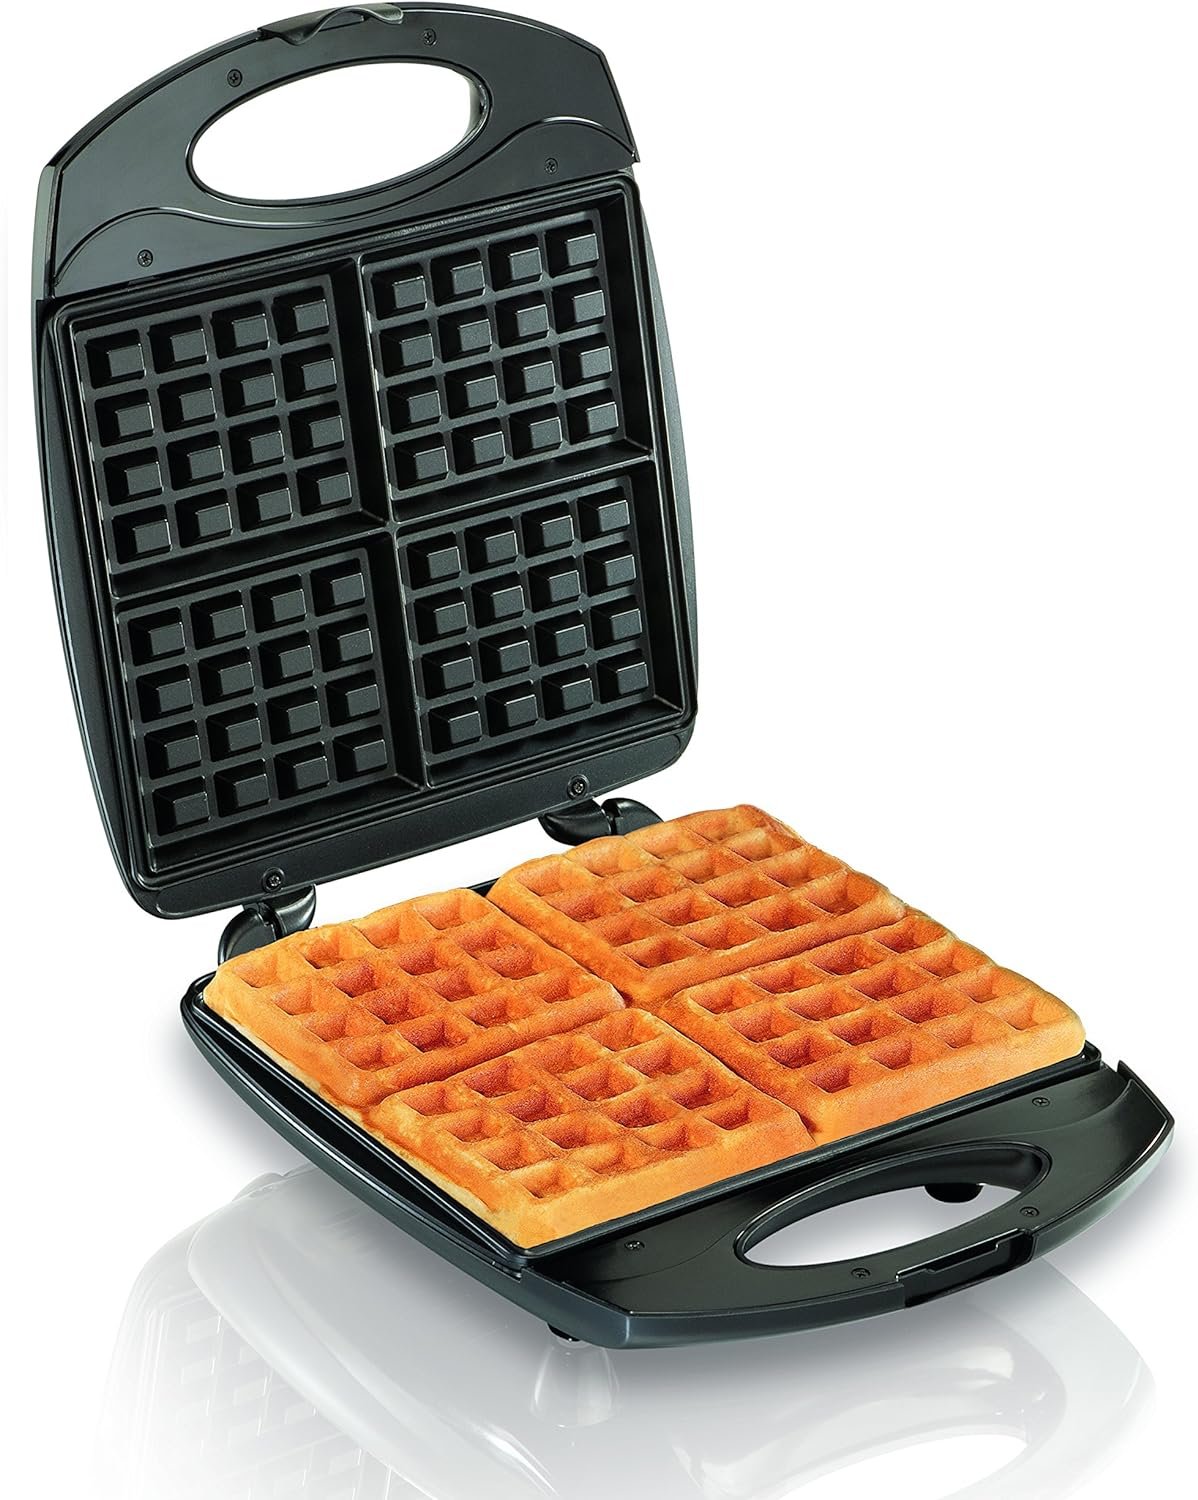 Hamilton Beach 4-Slice Non-Stick Belgian Waffle Maker with Indicator Lights, Compact Design, Black (26020)  Beach Electric Indoor Grill, 6-Serving, Nonstick Easy Clean Plates, Silver (25371)